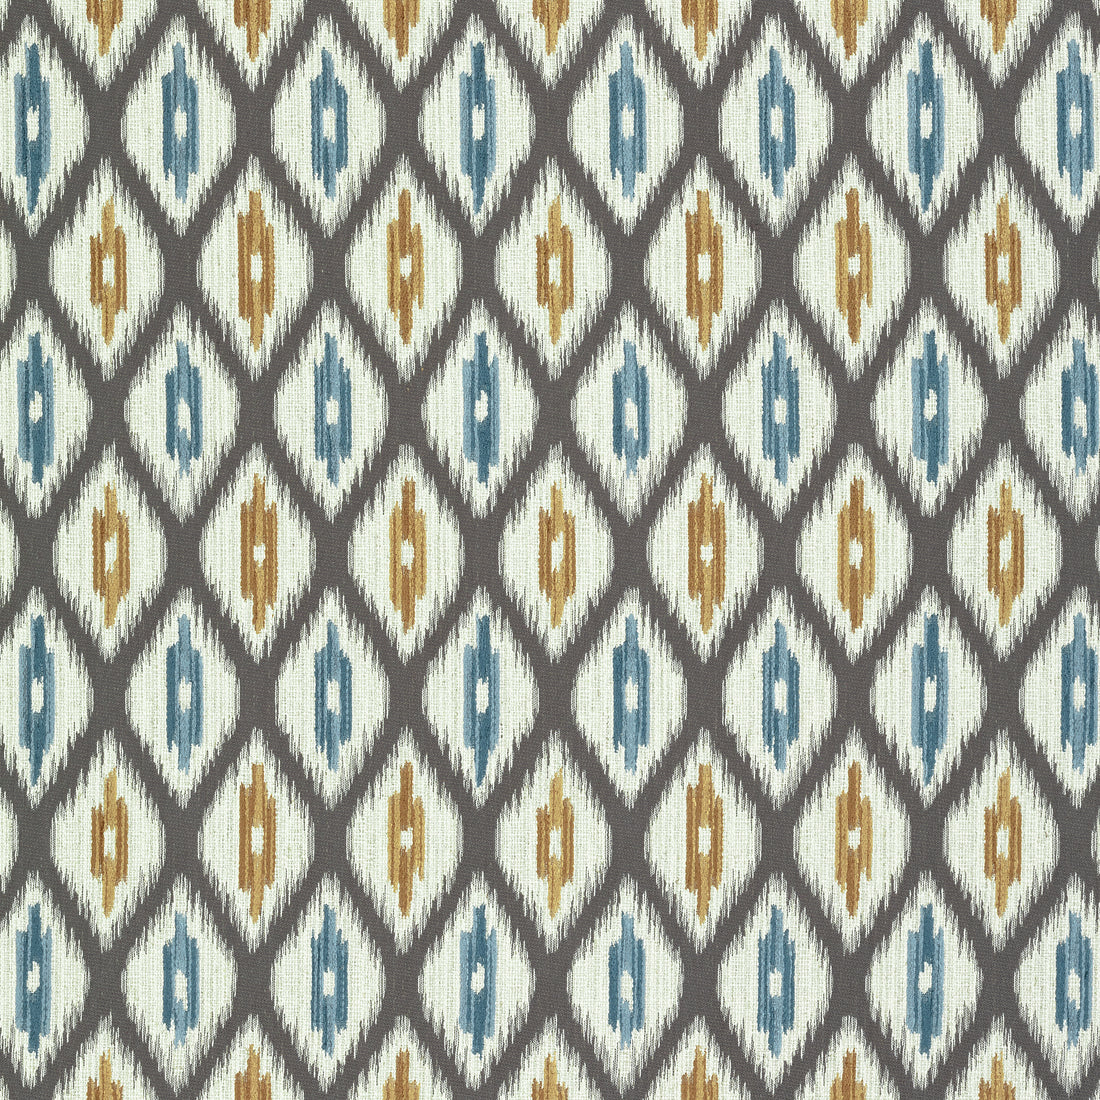 Rajah fabric in charcoal color - pattern number W73364 - by Thibaut in the Nomad collection